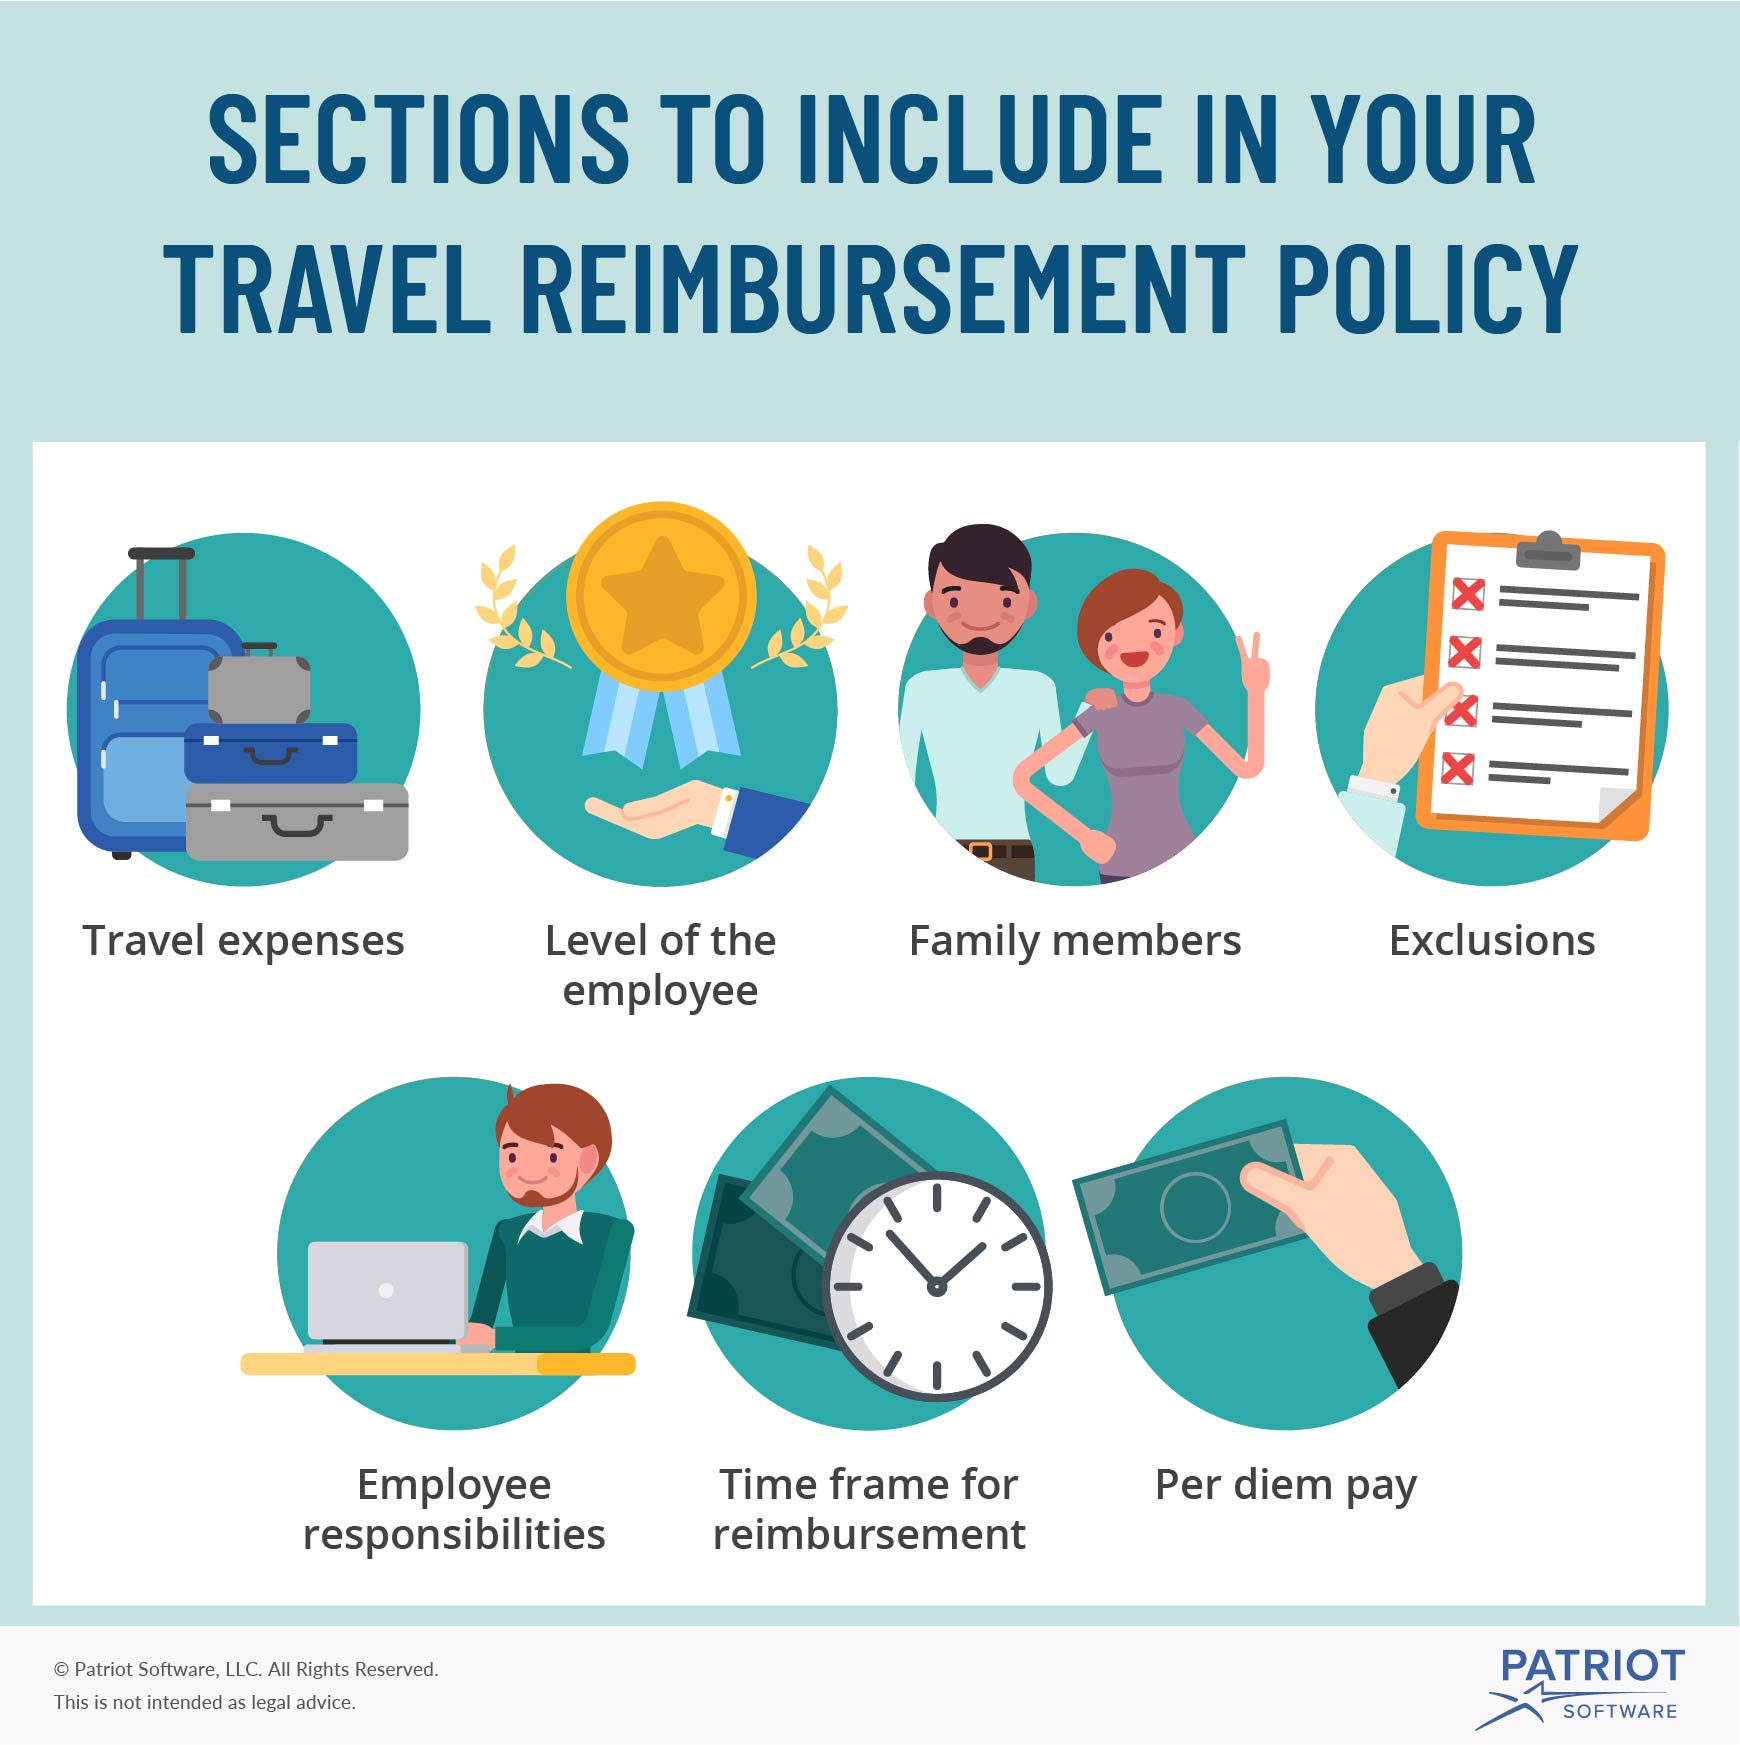 Travel Reimbursement Policy Sections to Include & More